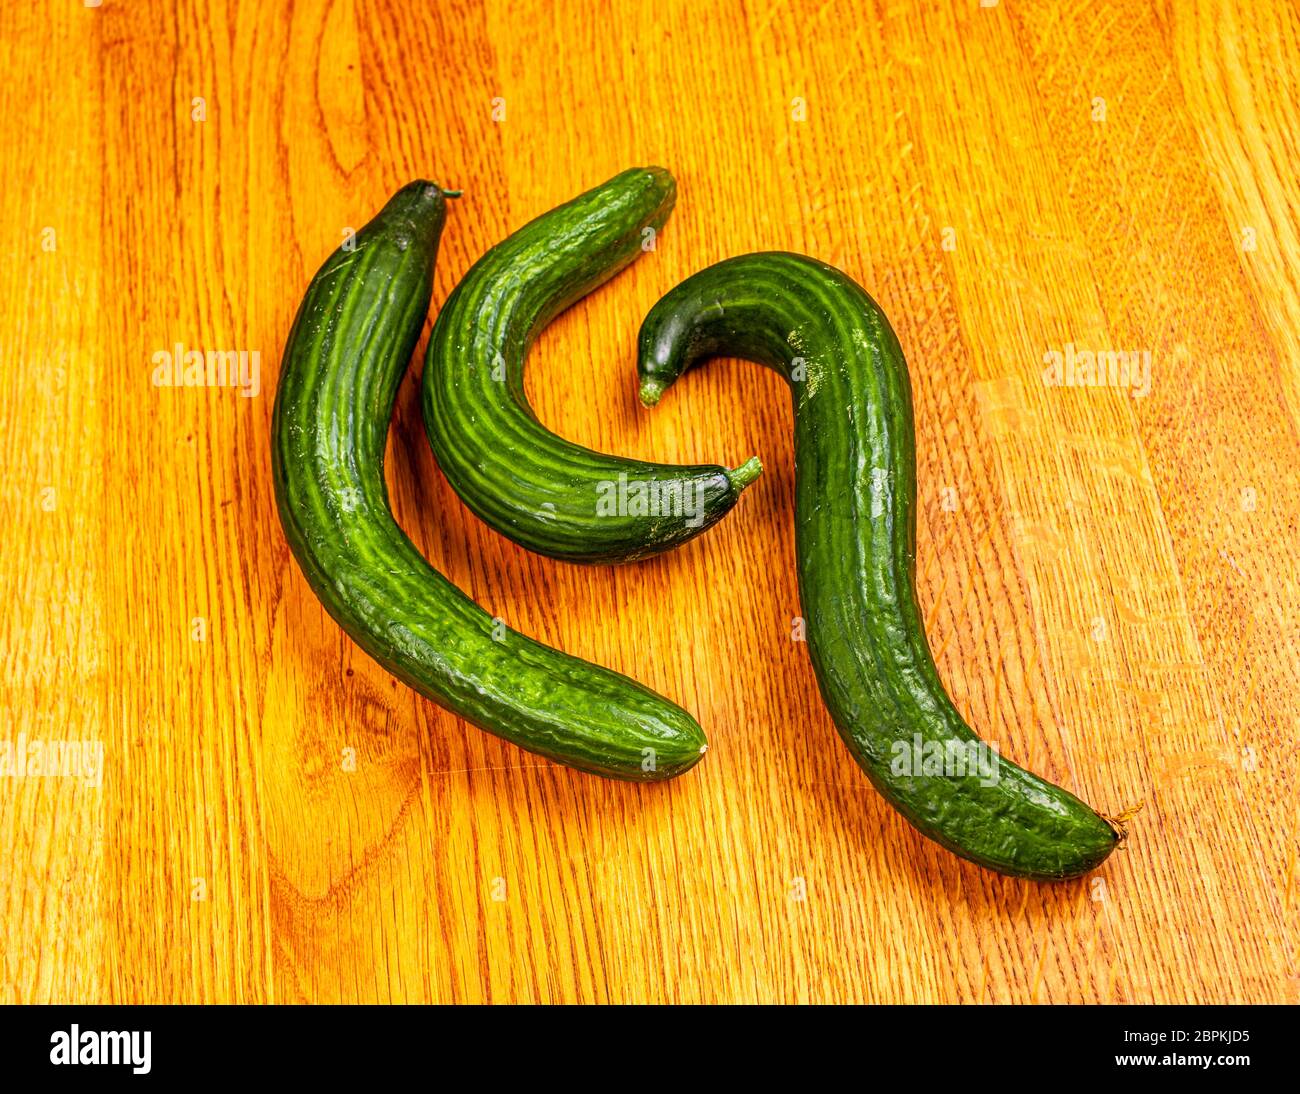 Misfits. Uneven Cucumbers in Grevenbroich, Germany Stock Photo